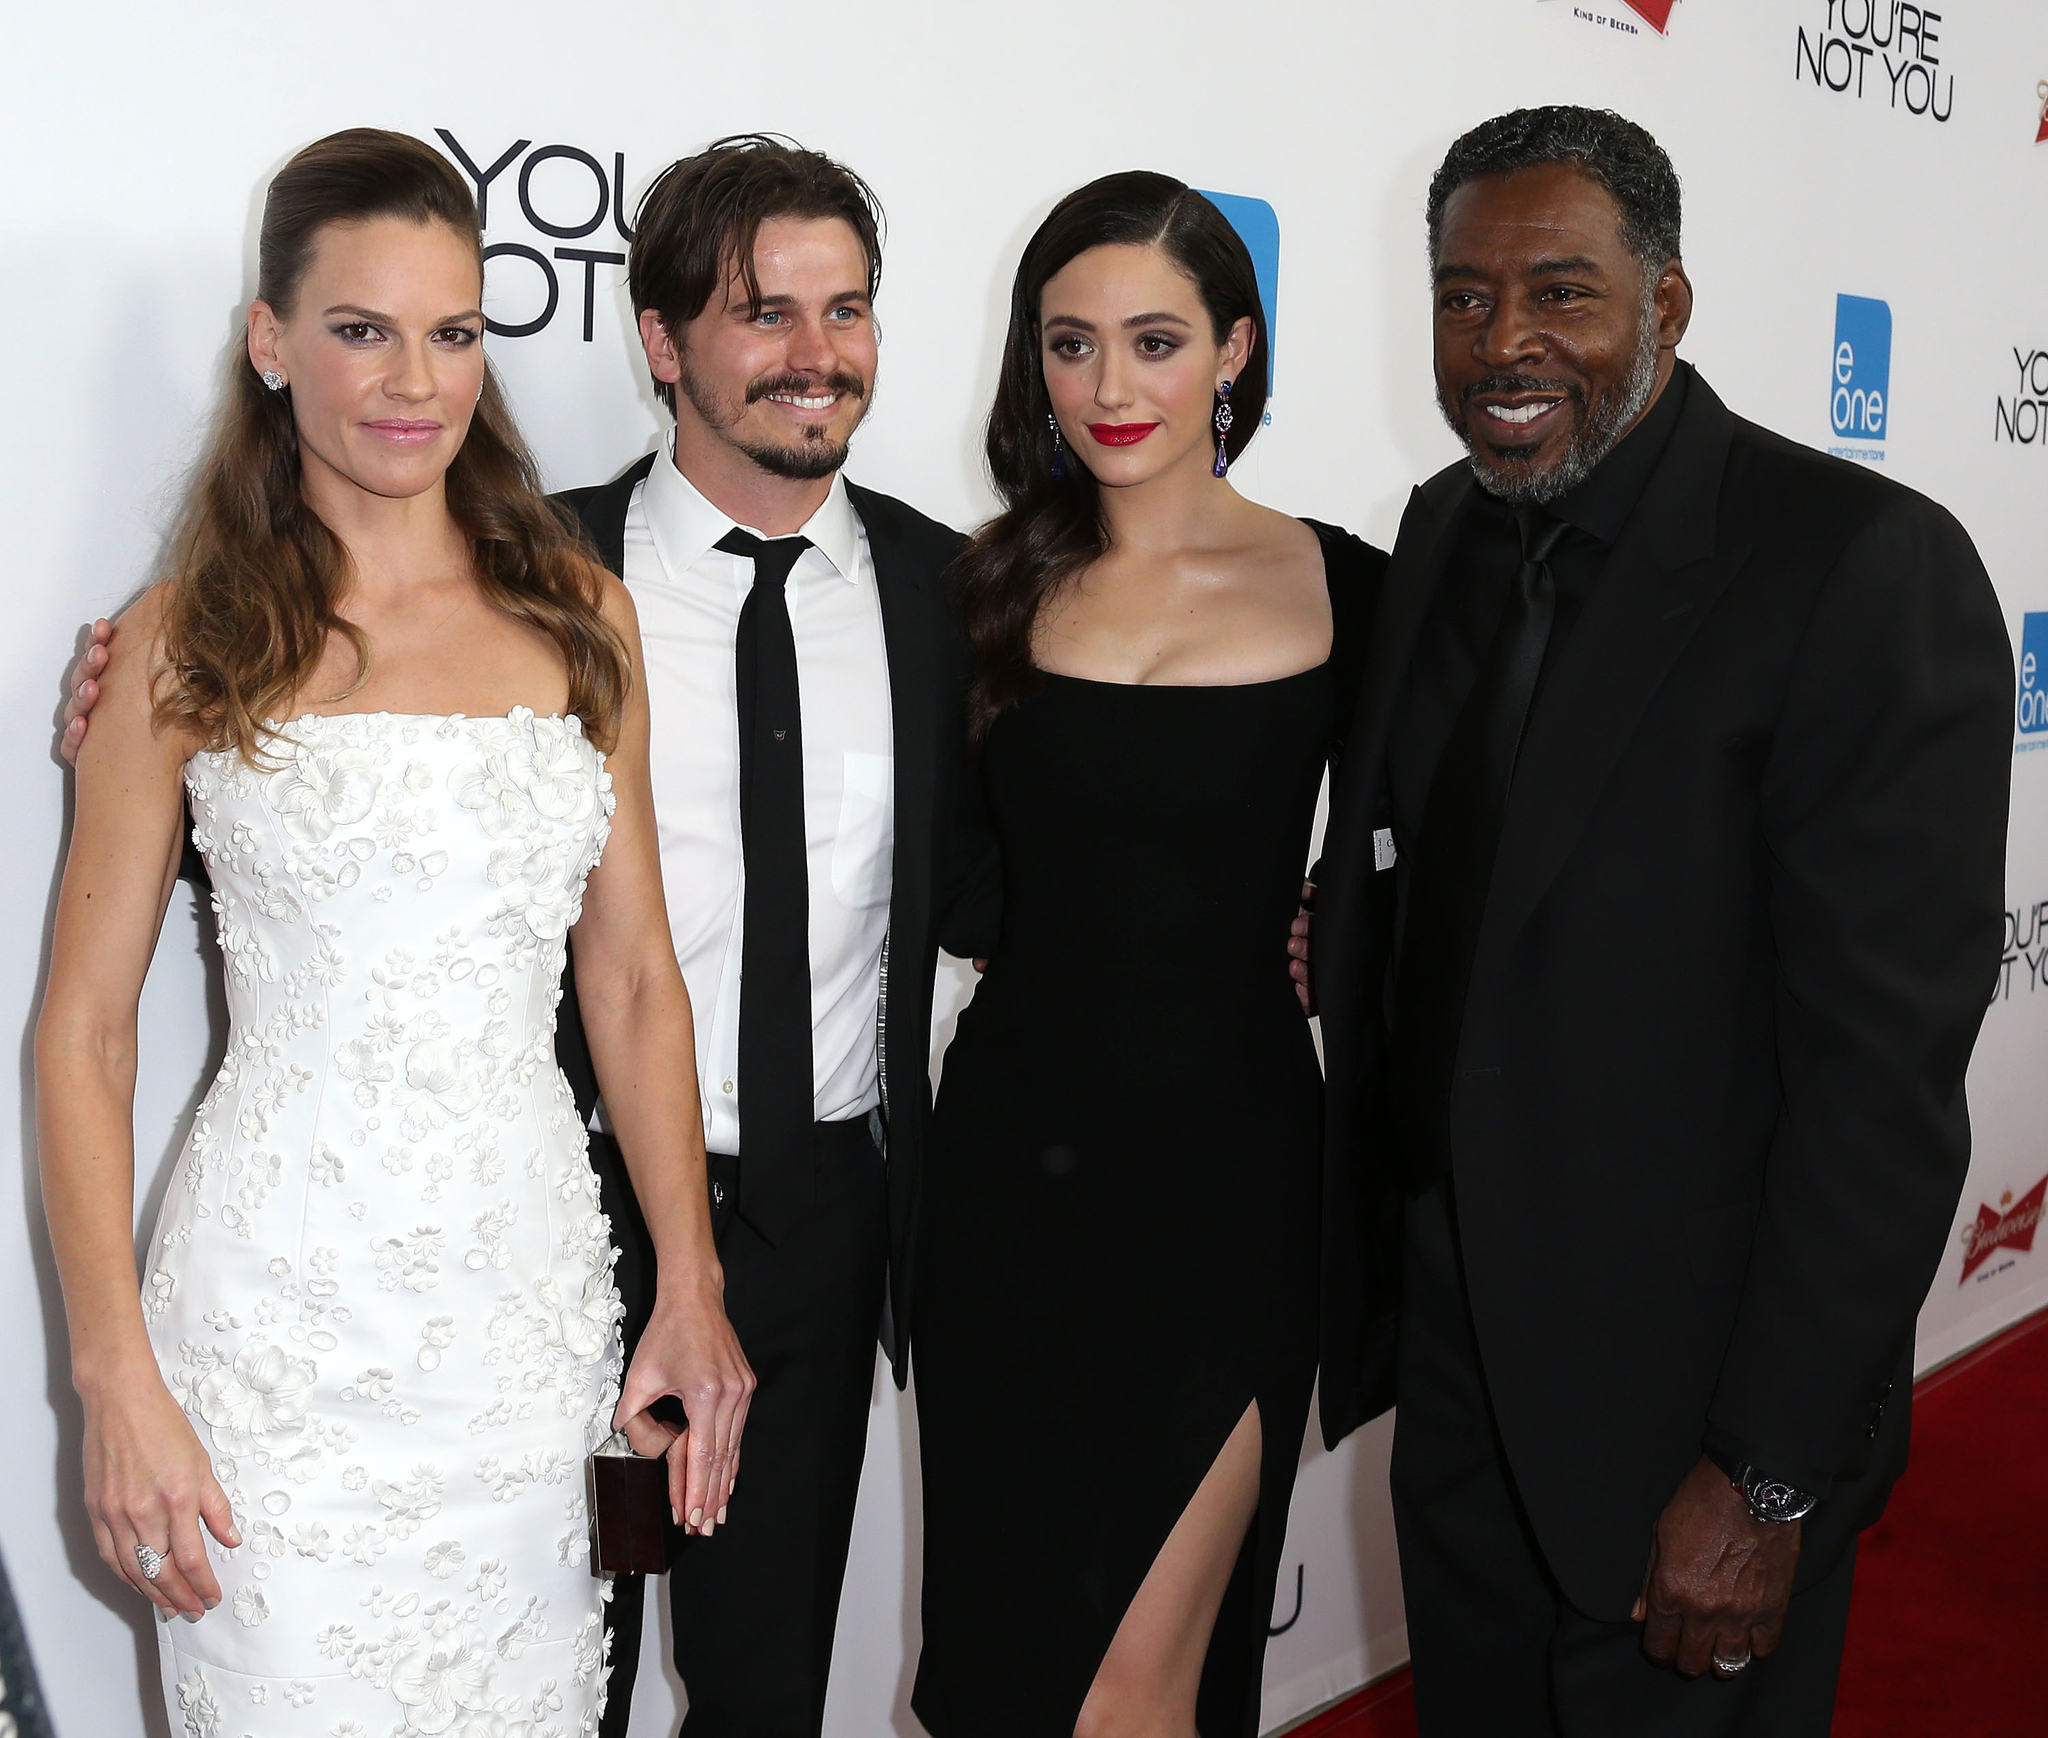 Ernie Hudson, Emmy Rossum, Hilary Swank and Jason Ritter at event of You're Not You (2014)